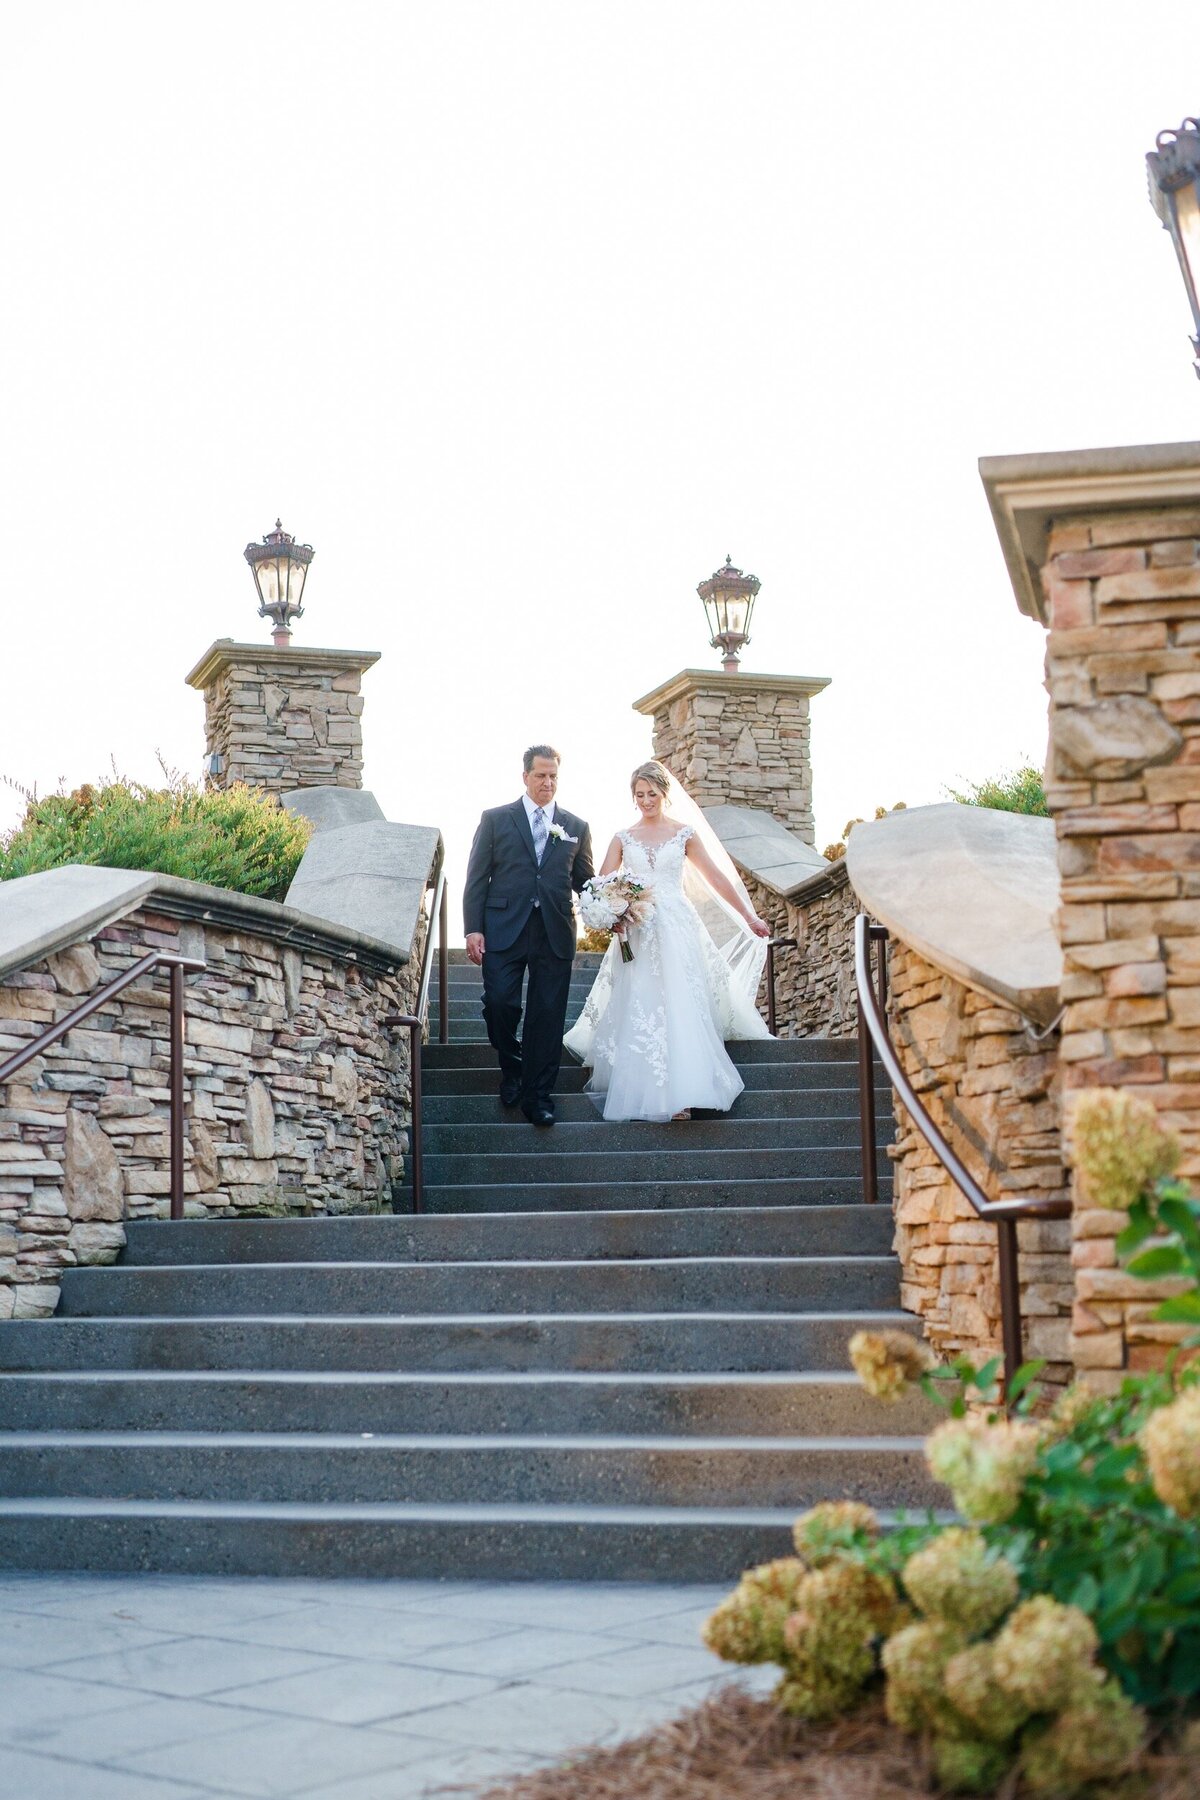 A father escorts his daughter down a stone staircase on their way to her wedding ceremony at a vineyard venue near Charlotte, NC.